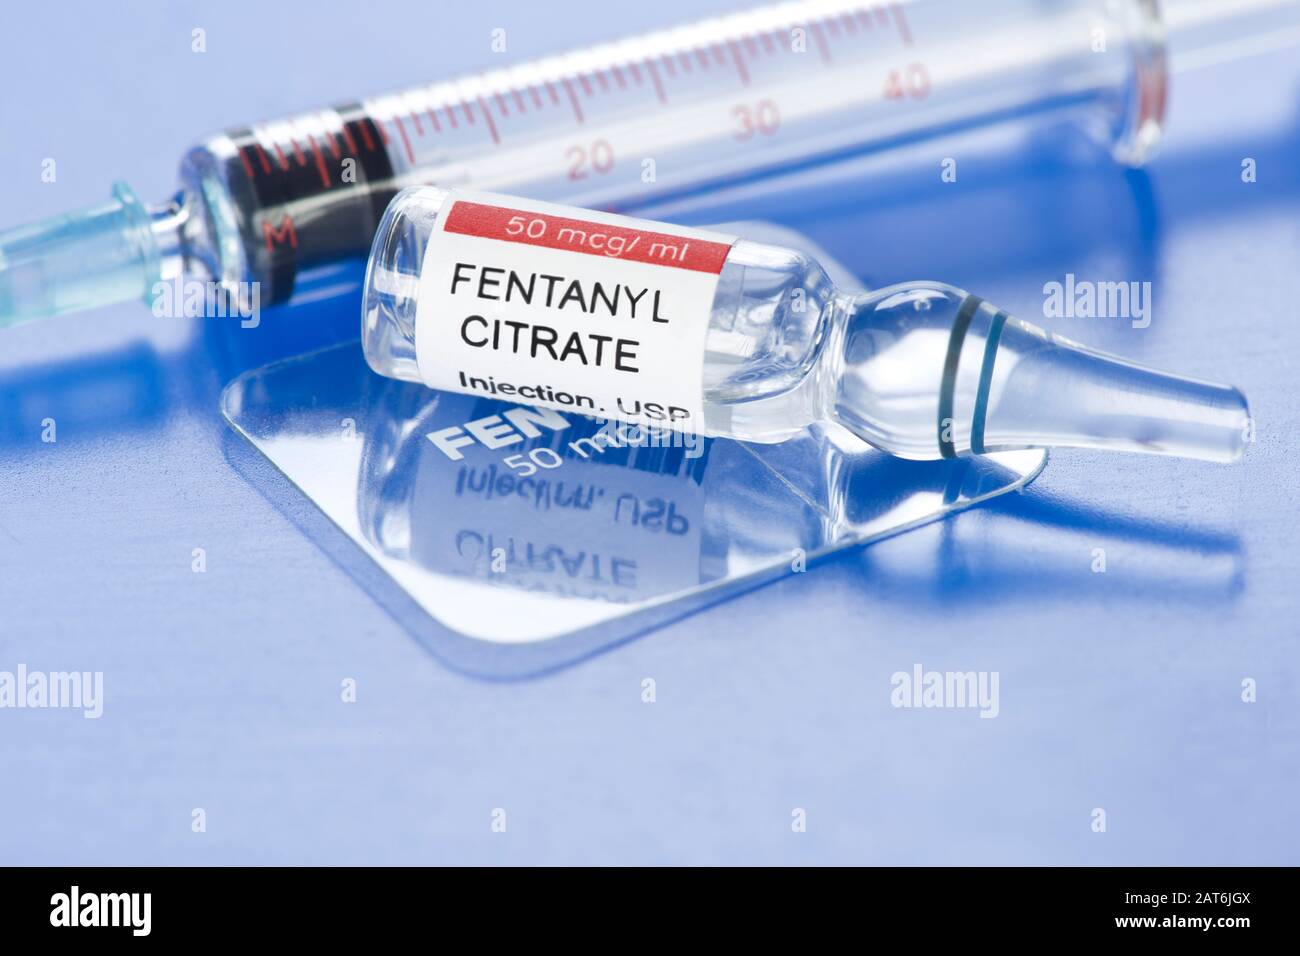 Fentanyl citrate injection ampule with clear fentanyl dermal patch and syringe on blue tray. Stock Photo